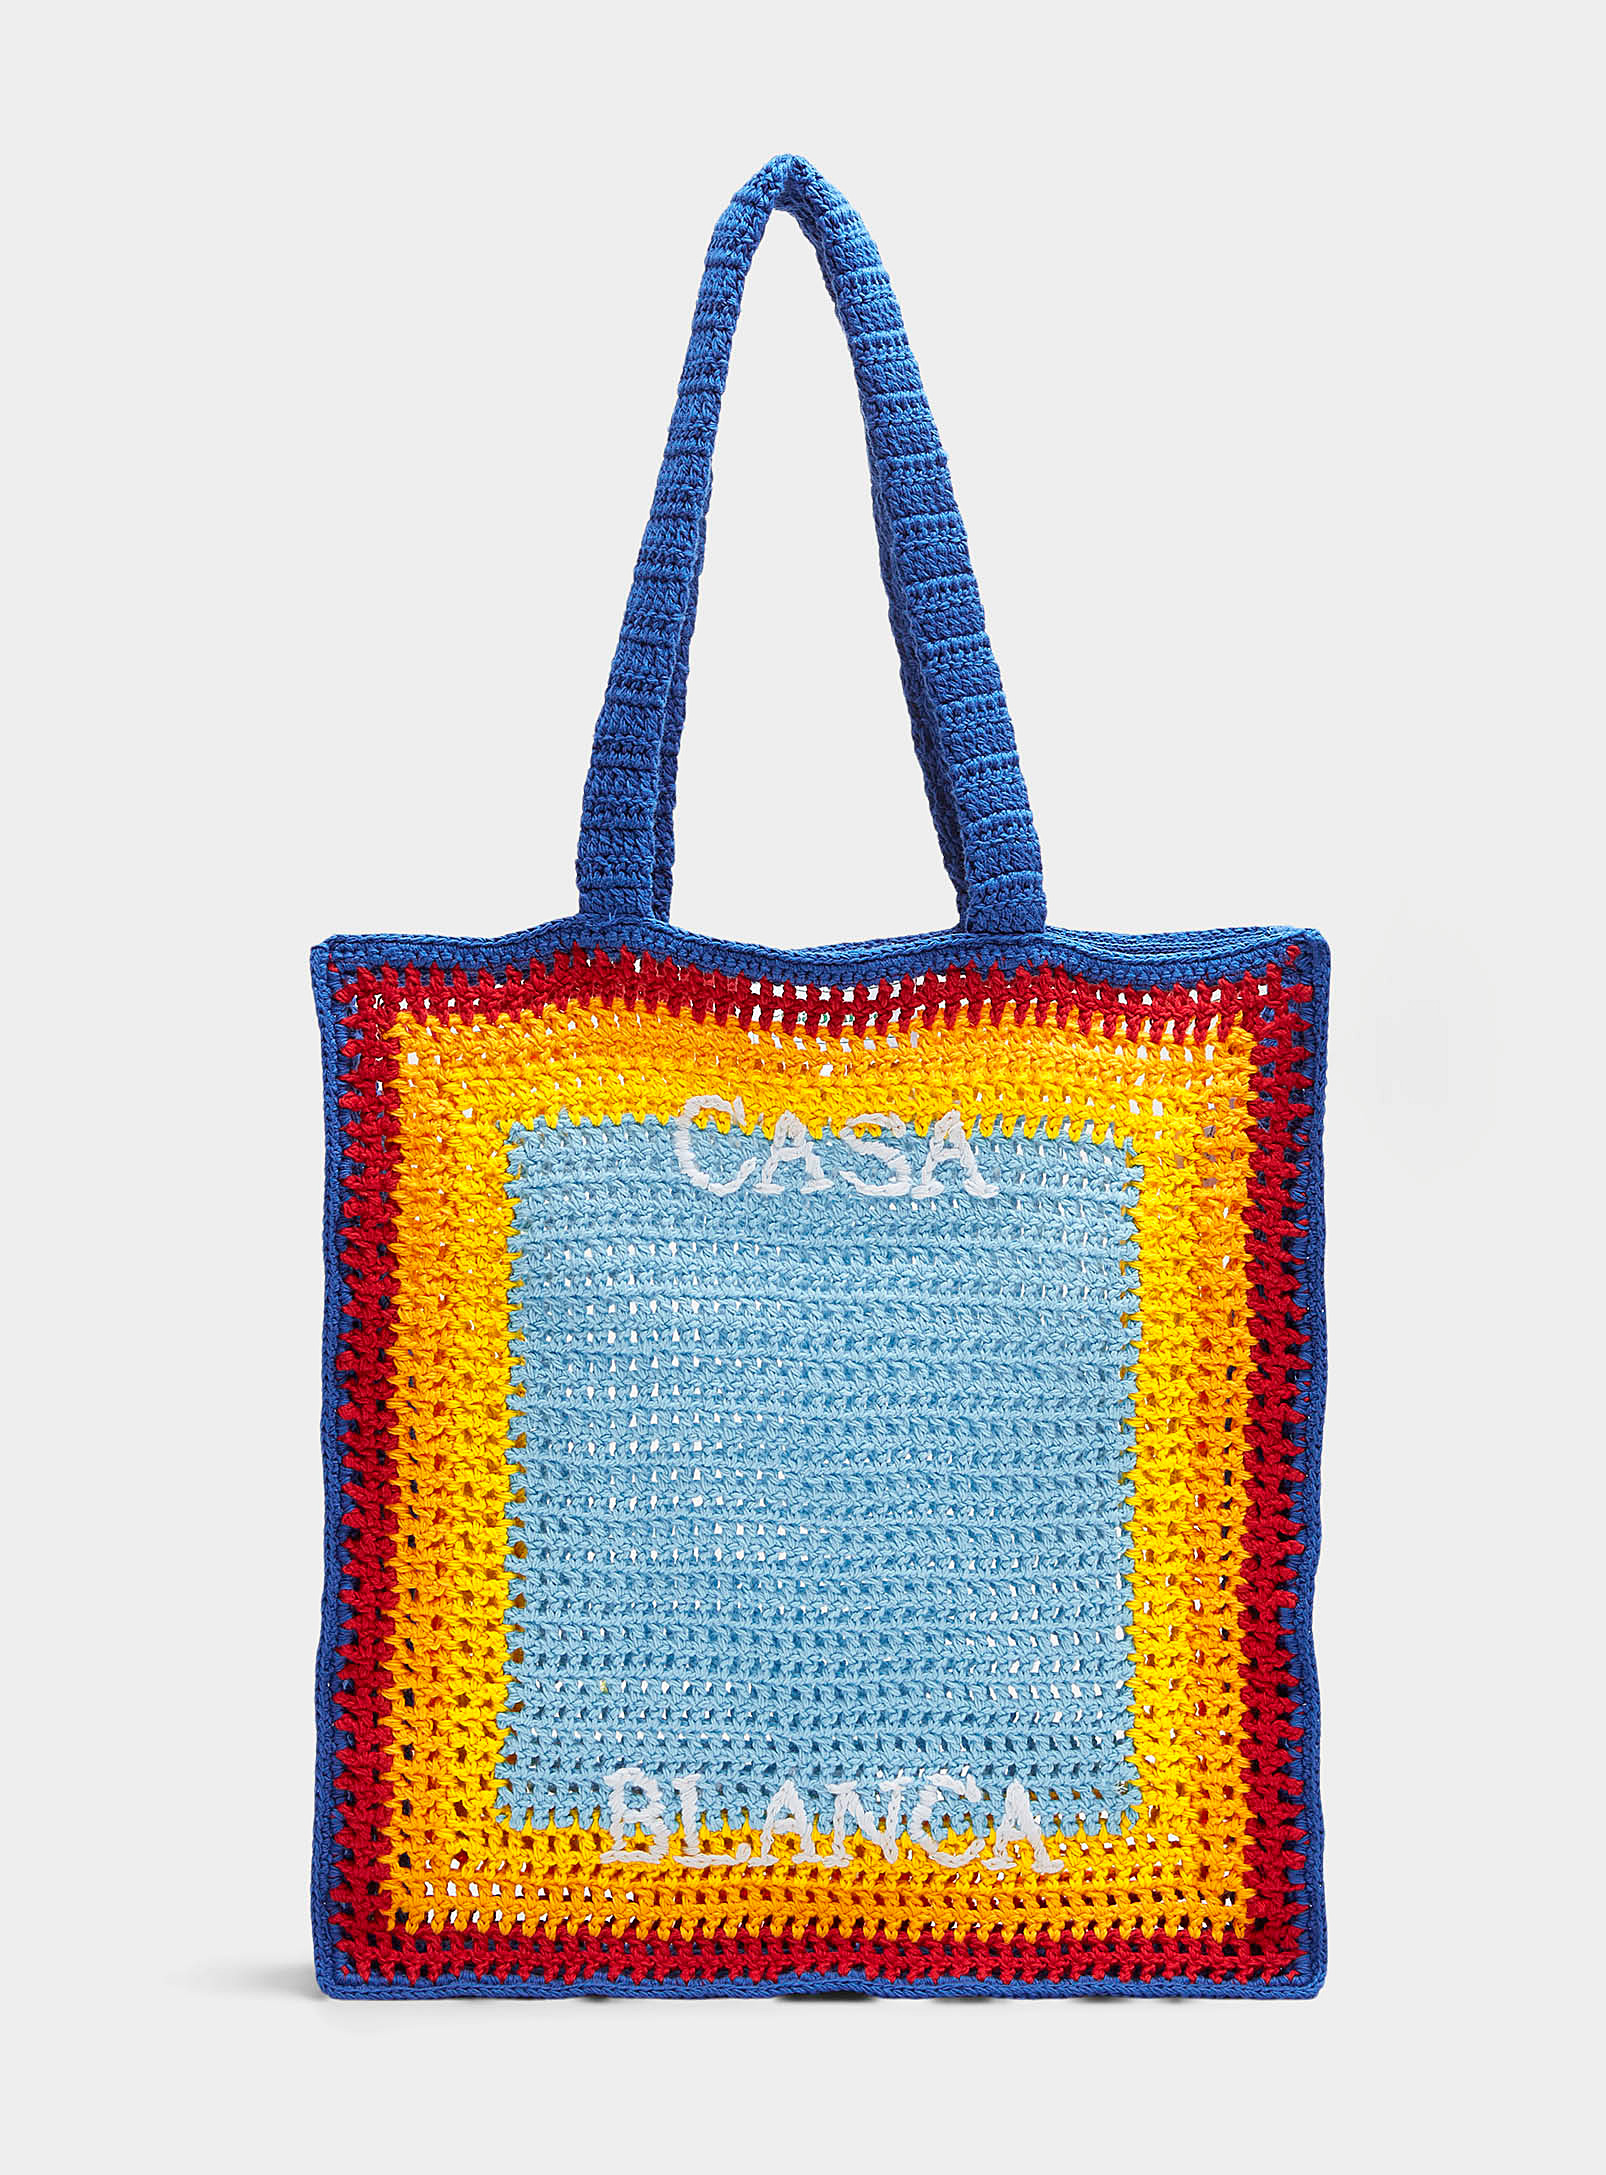 Casablanca Arch Crocheted Knit Bag In Patterned Blue